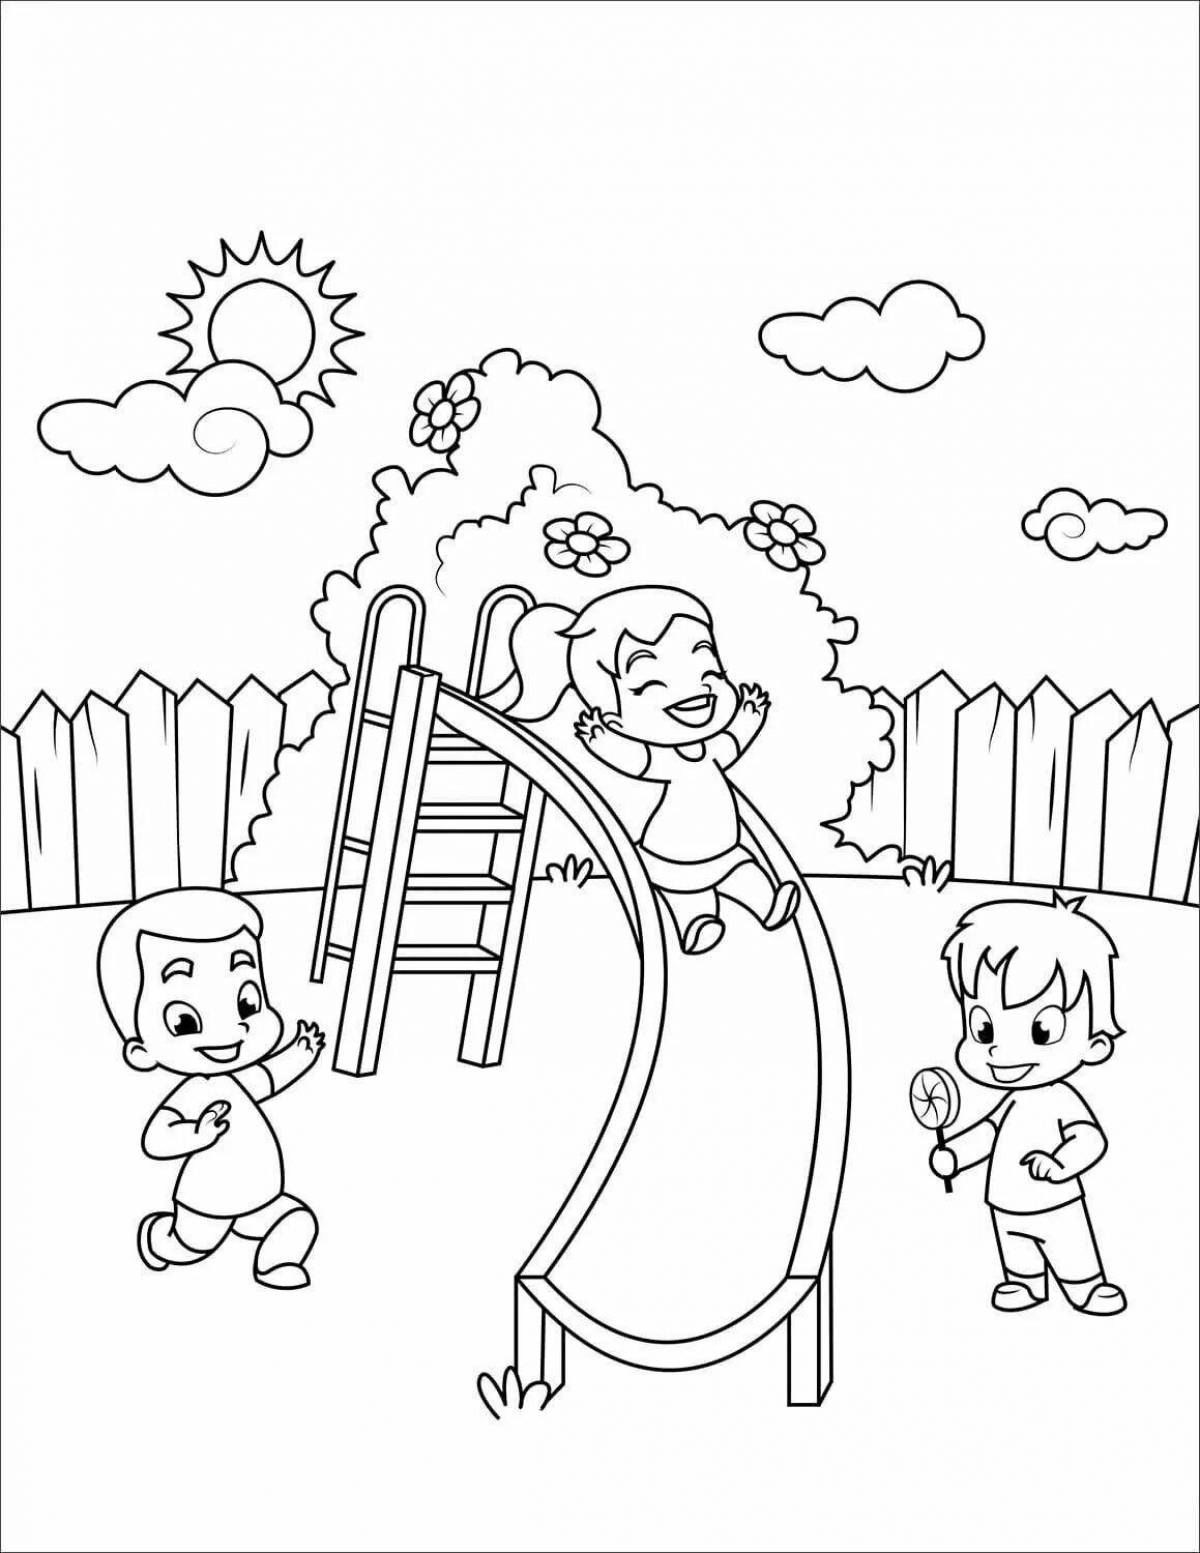 Coloring page area colorful-imagination